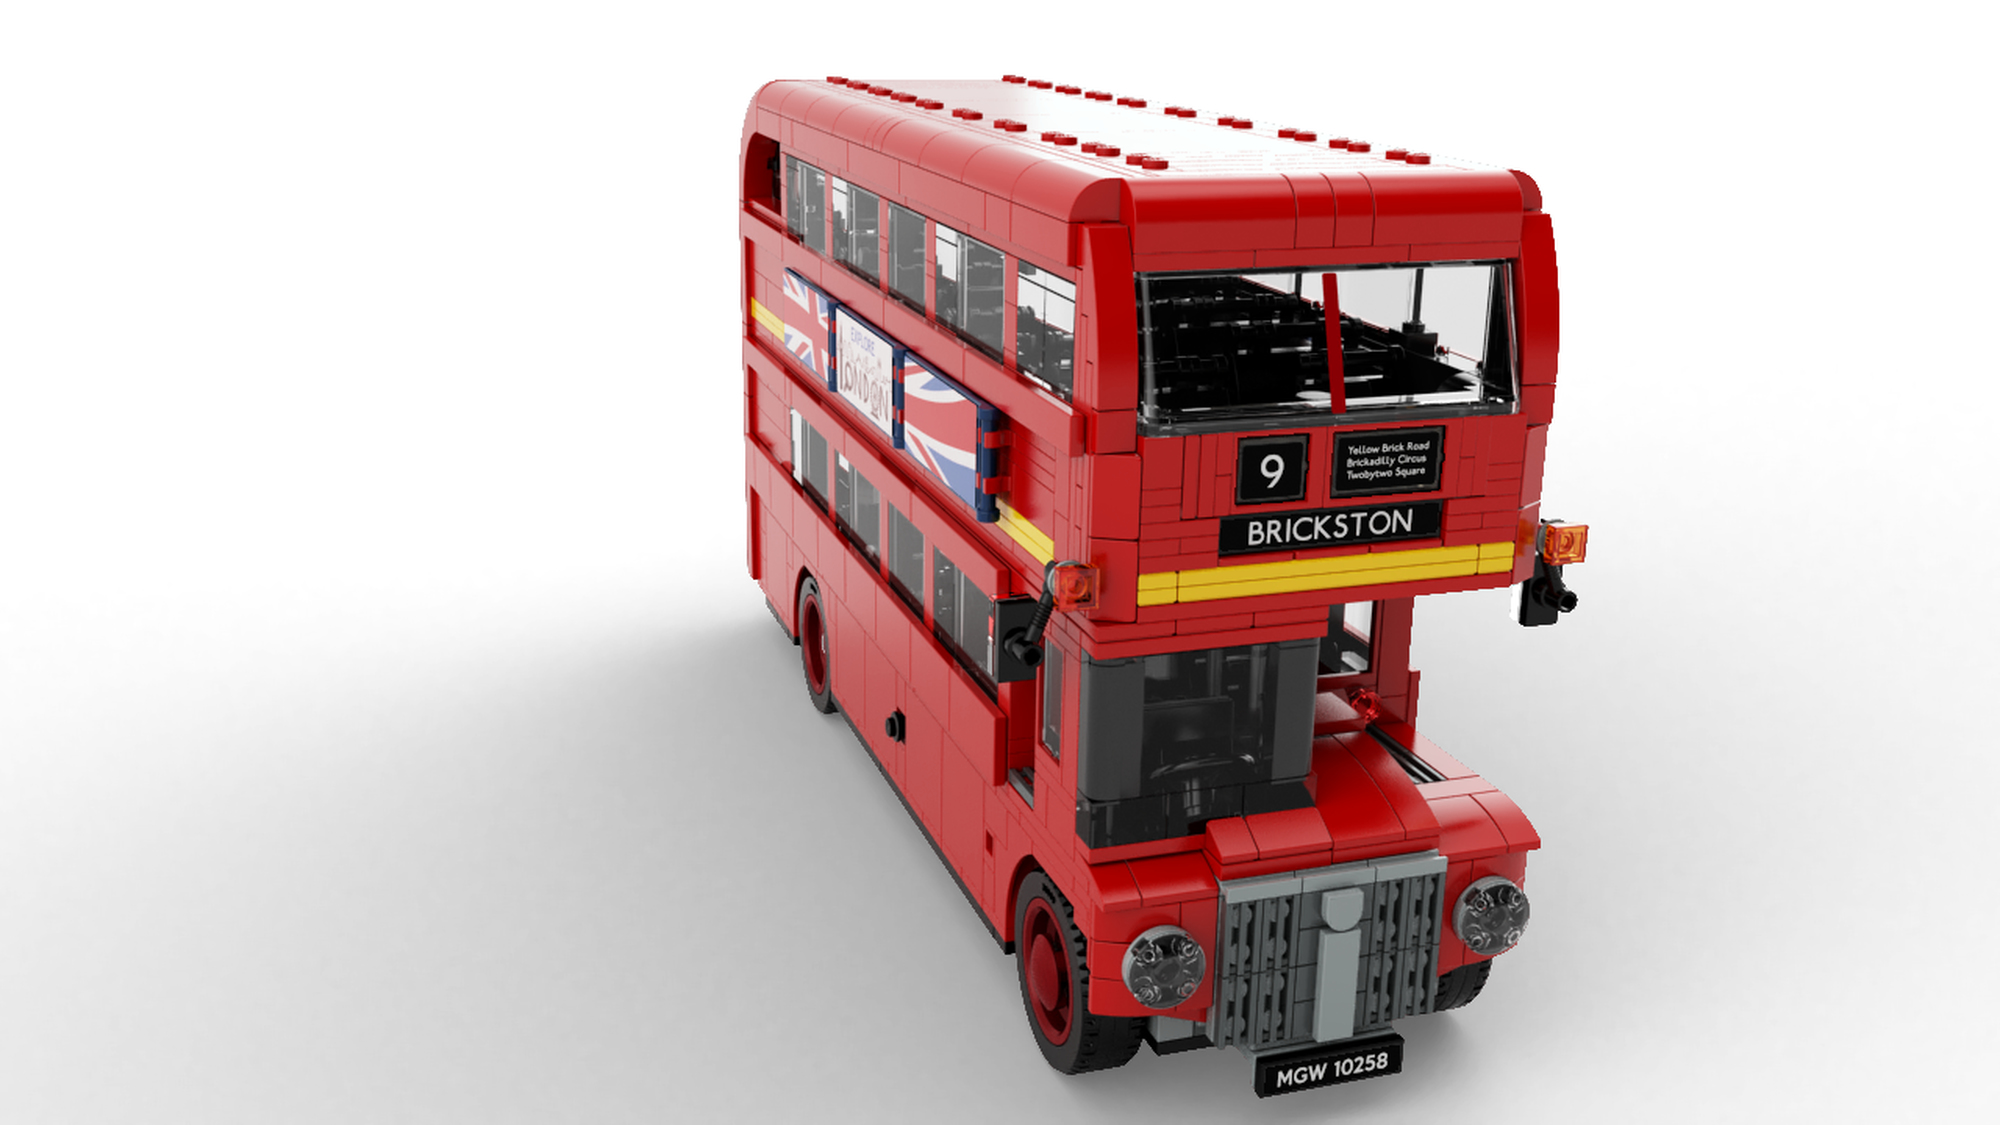 LEGO White Flag 2 x 2 with Yellow Bus and Route Information